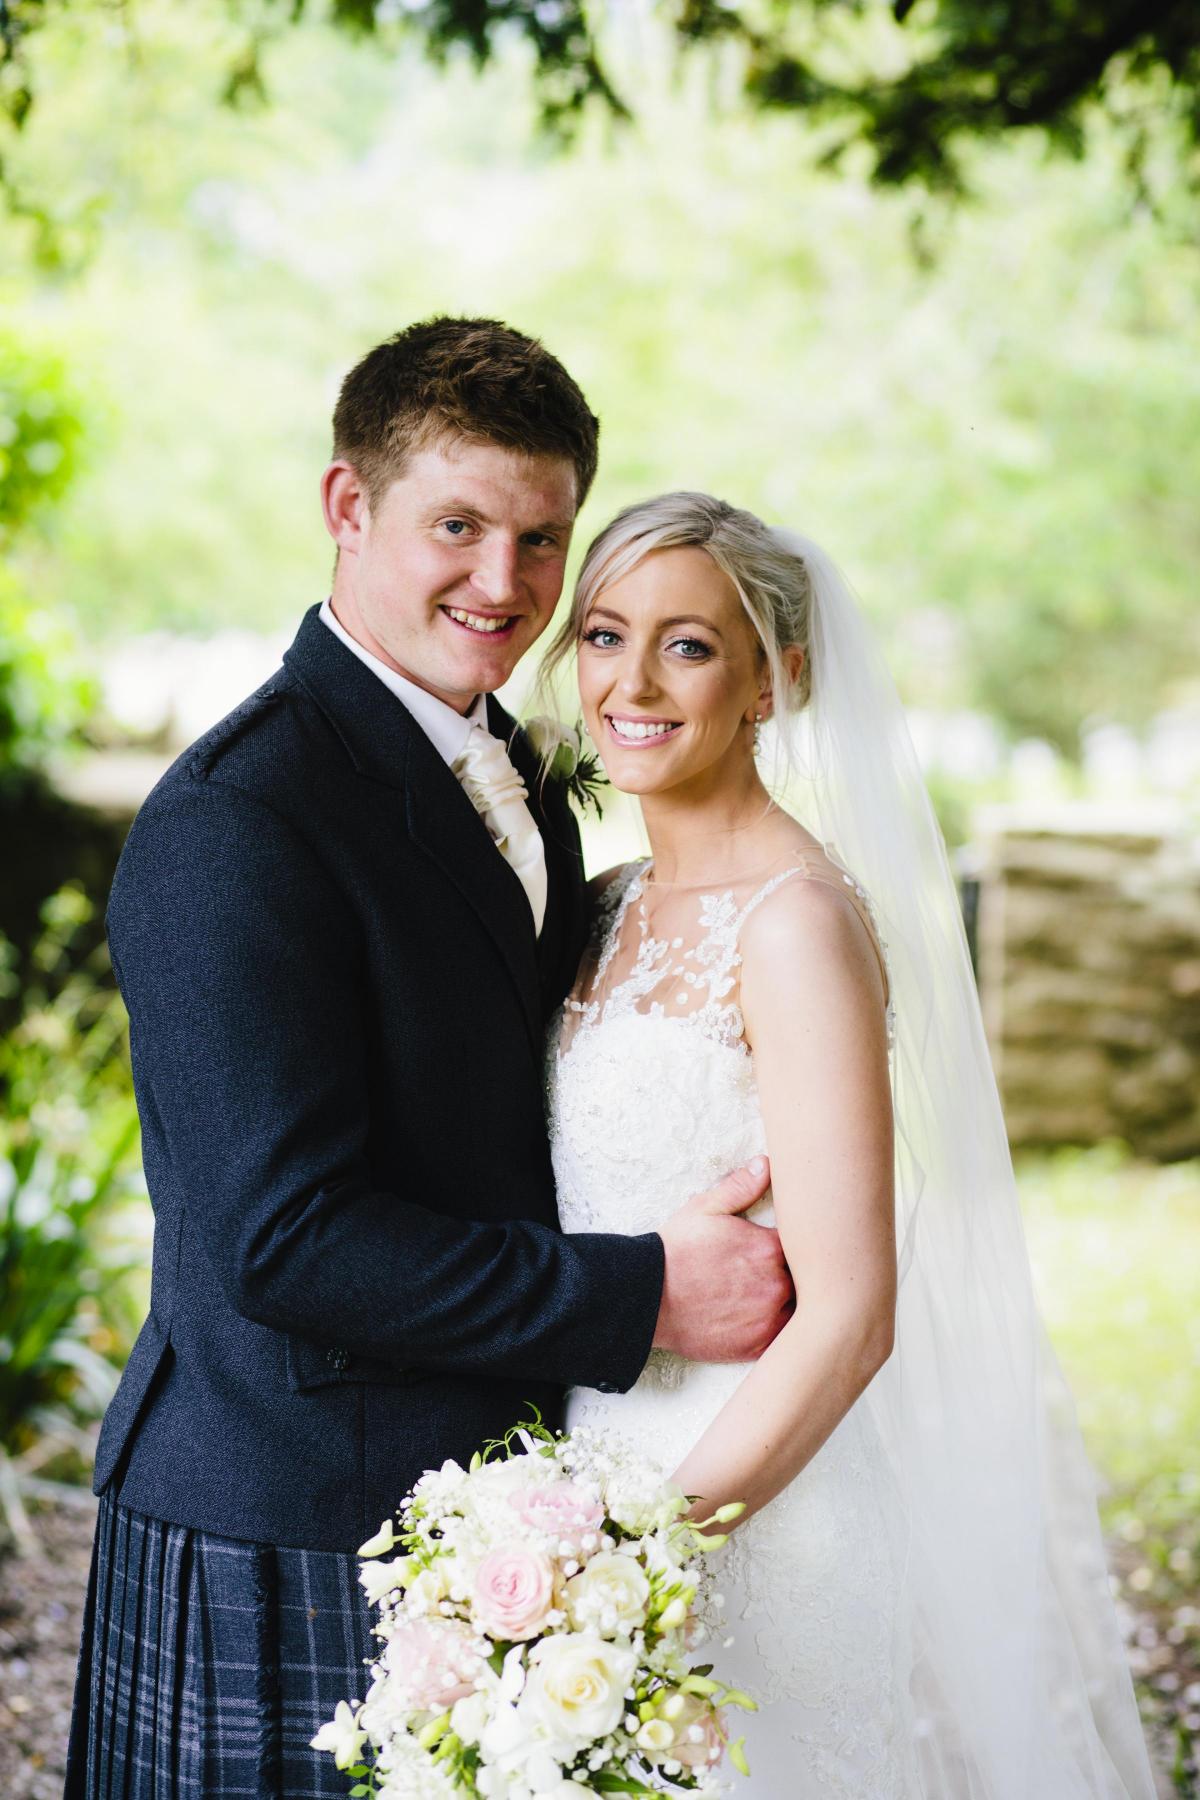 Michael Yates, Castle Douglas, married Emma Jones, Wilcrick, South Wales, at St Mary's Church, Wilcrick, South Wales. 